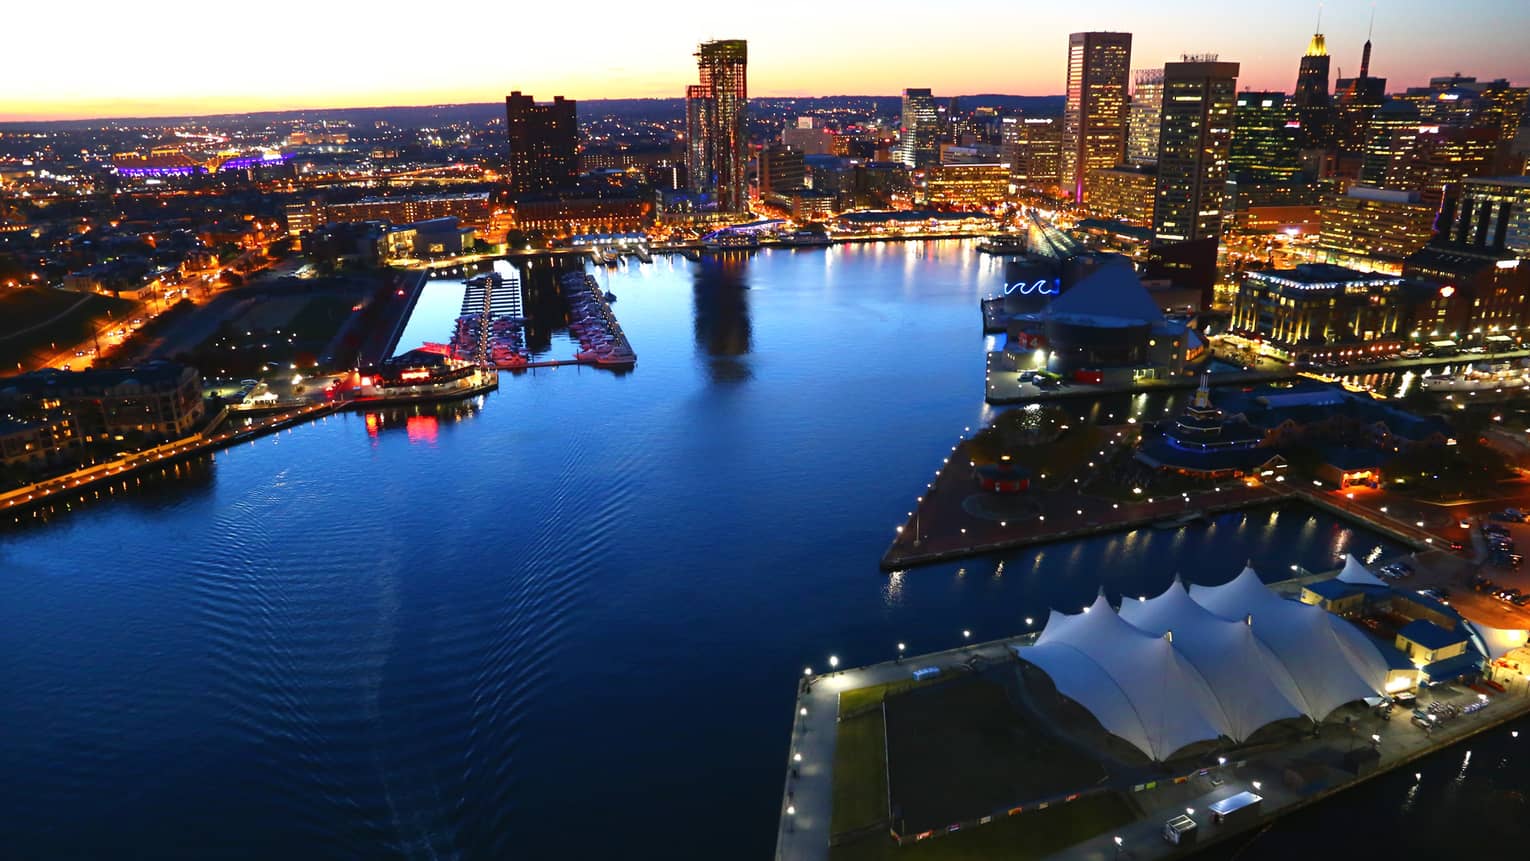 View of the harbour in Baltimore at dusk, surrounded by city lights